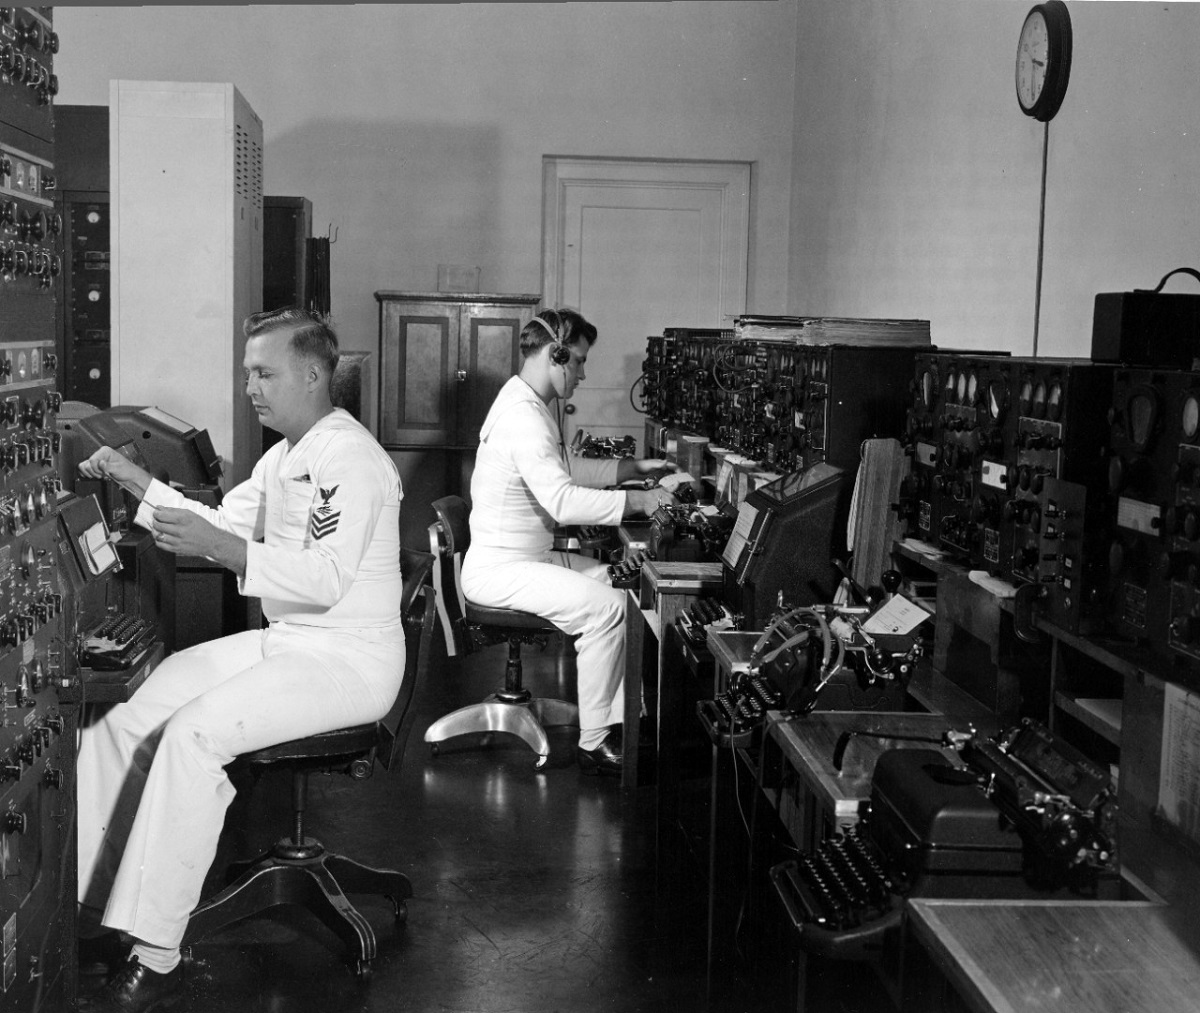 At left RM1C William G. Turpin reads radio-teletype tape just received at Naval Radio Station, Cheltenham, Maryland, from the Commander Operational Development Force, ready for automatic retransmission to Radio Washington. At right, RM3C D.F. Wellner handles manual ship-shore radio circuit. U.S. Navy photo.